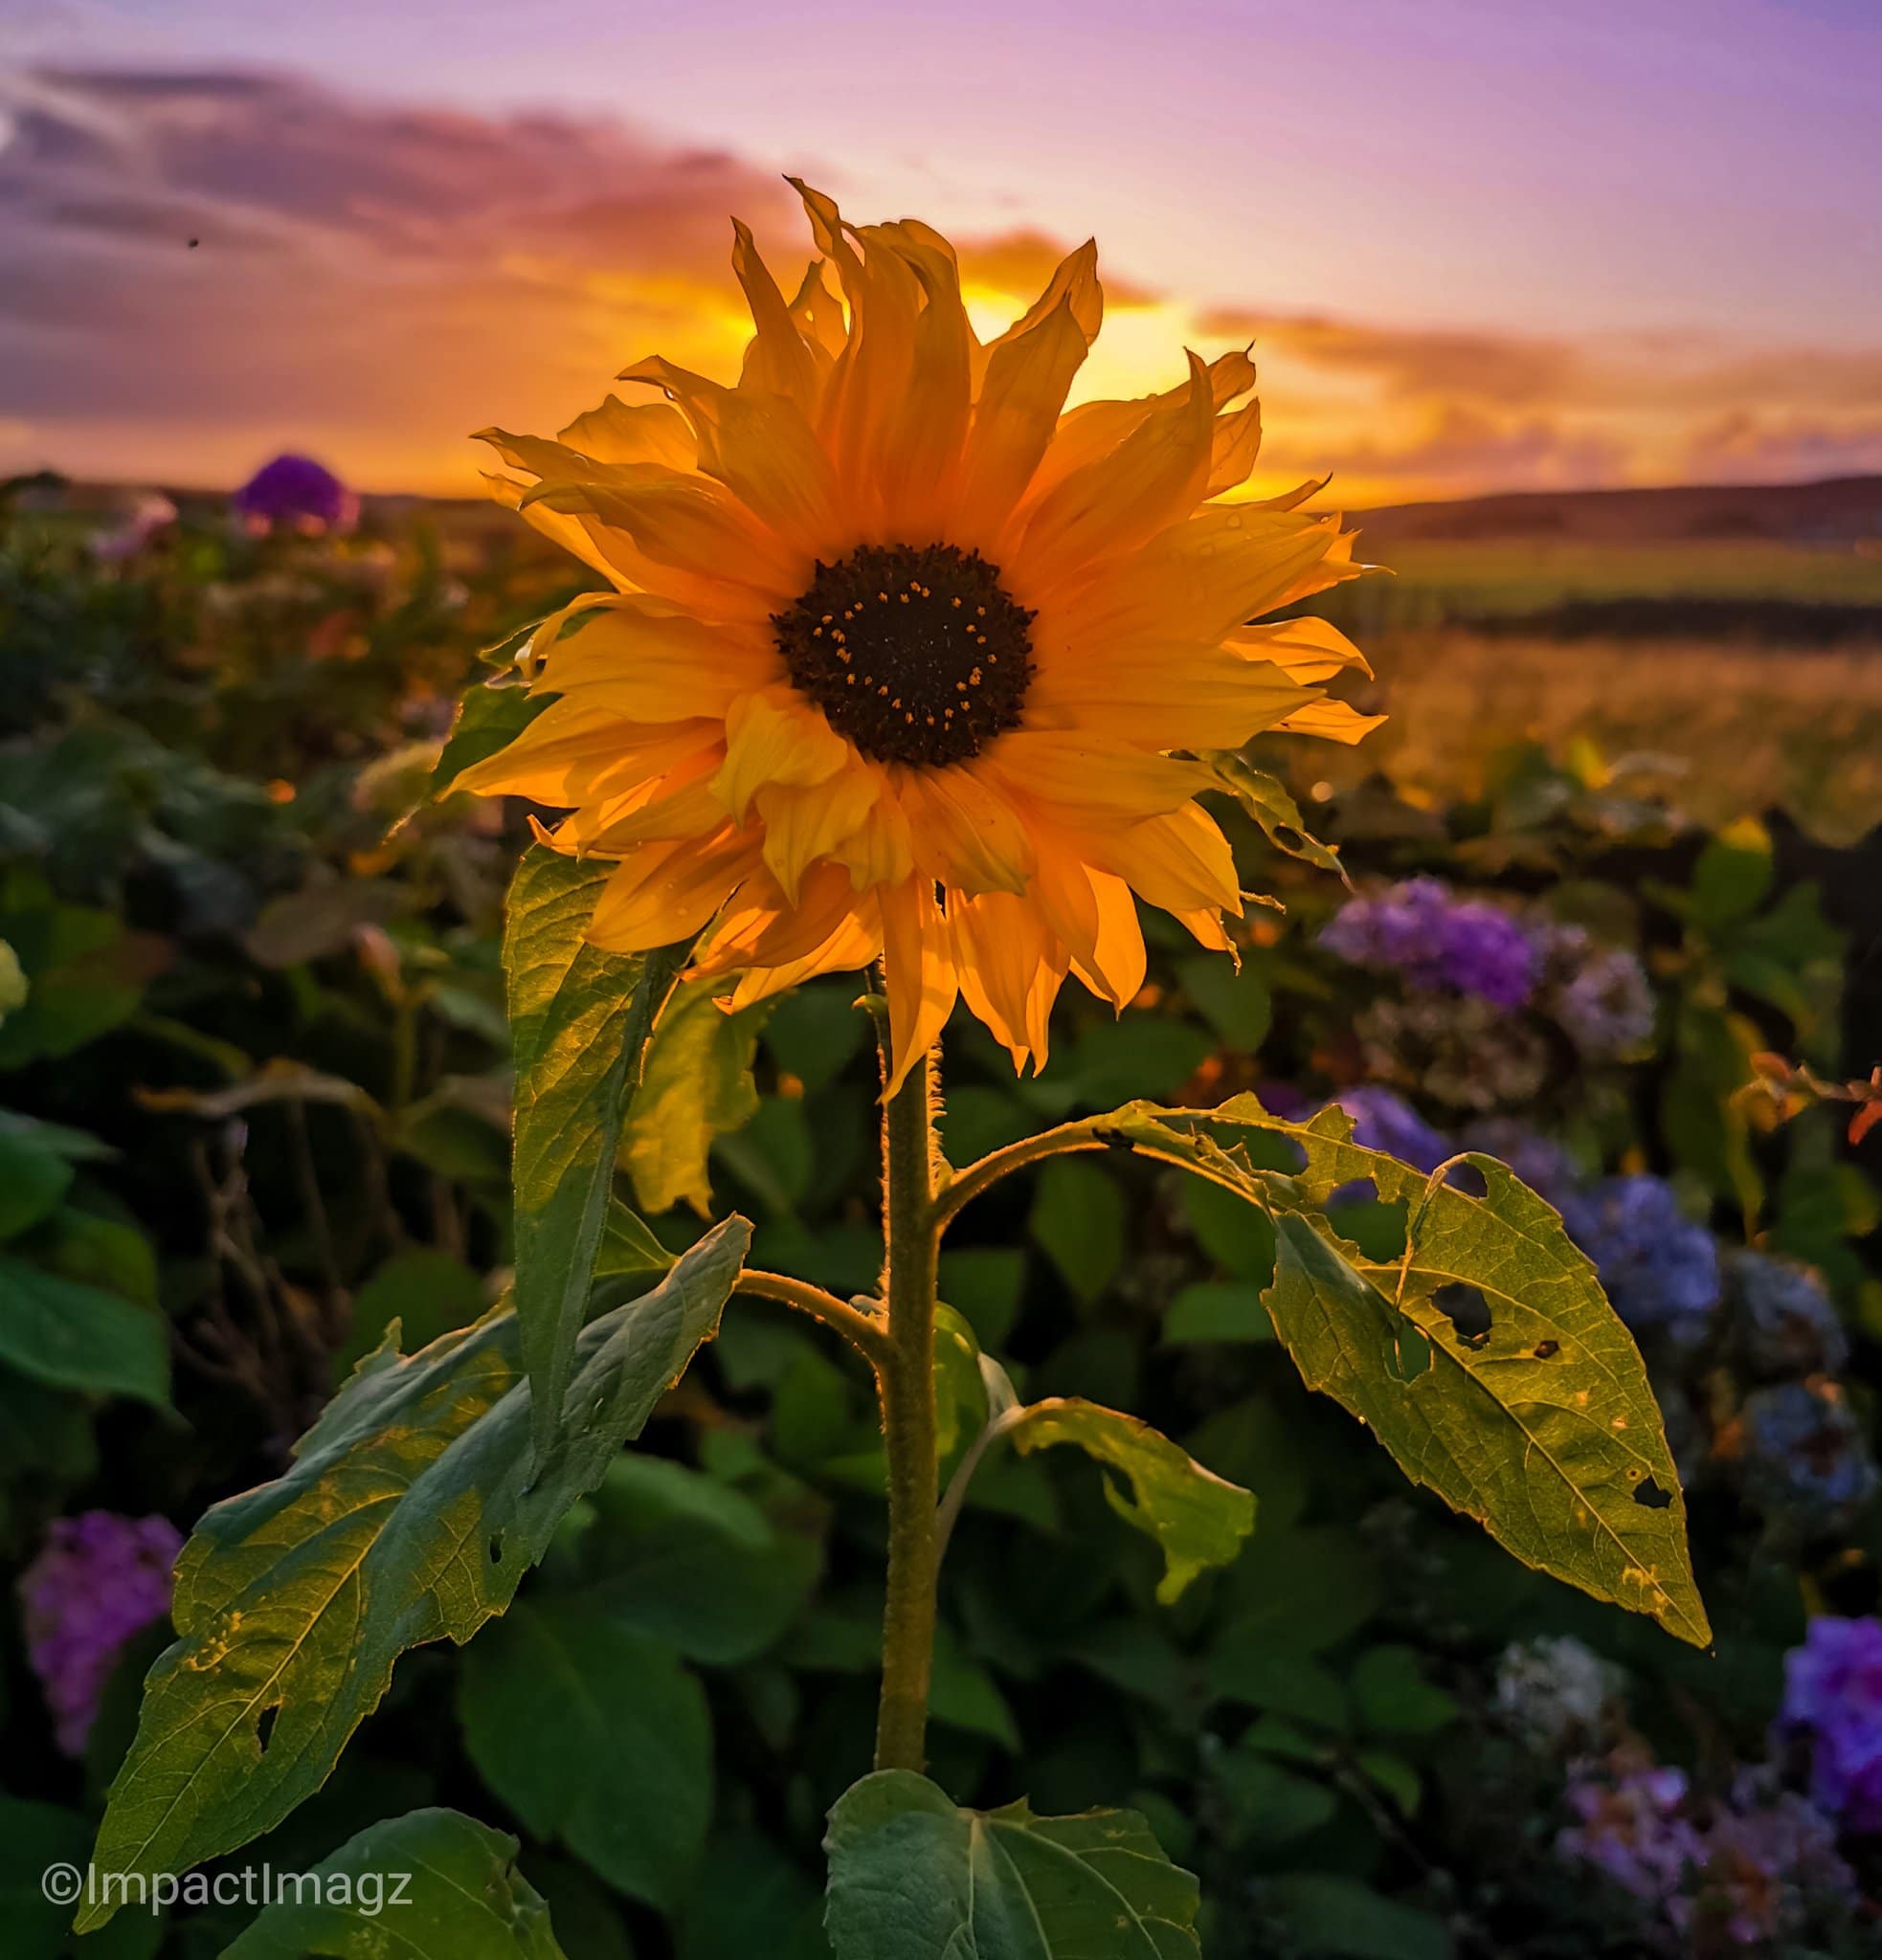 2nd Place A sunflower at sunset in my garden at Gress by Impact Imagz @ImpactImagz